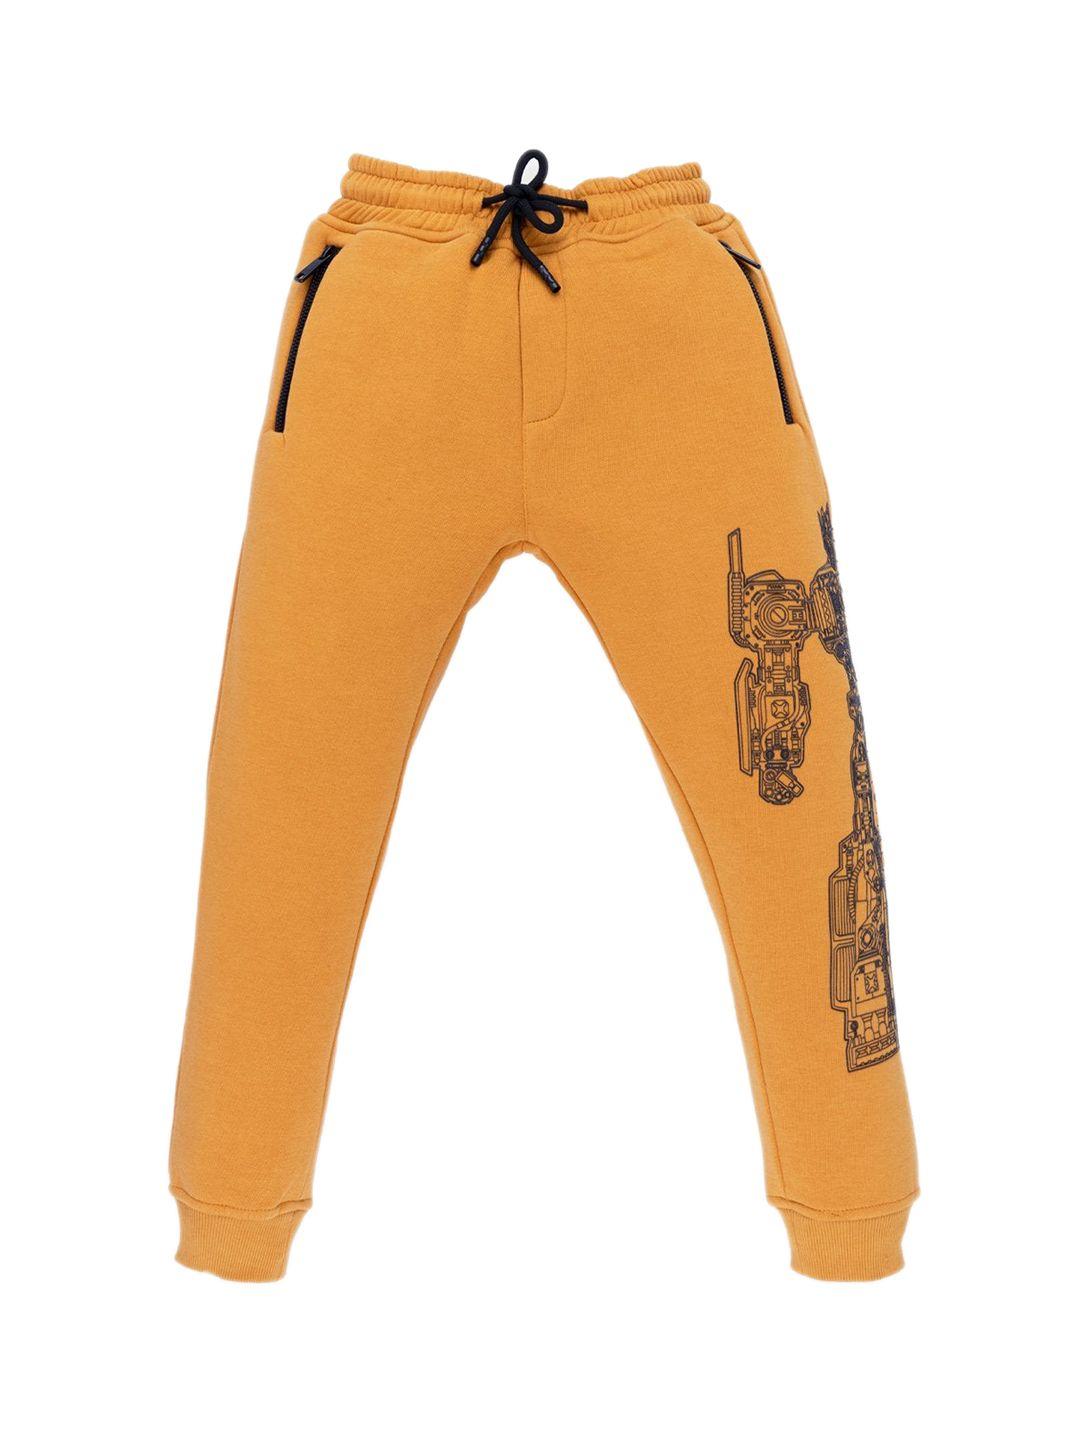 status quo boys mustard-yellow solid transformers printed joggers